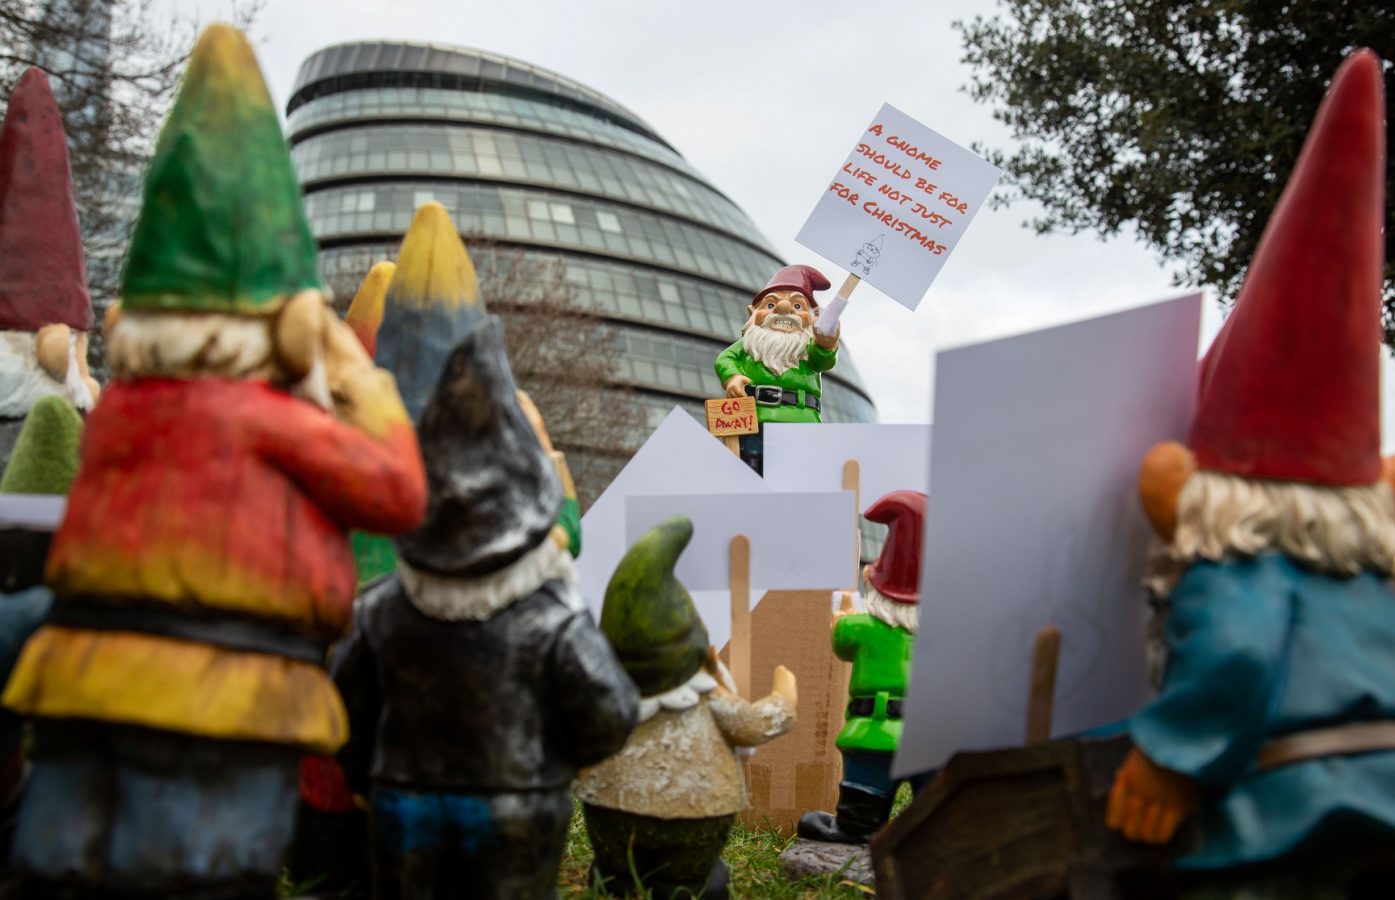 Garden gnomes spotted protesting outside City Hall